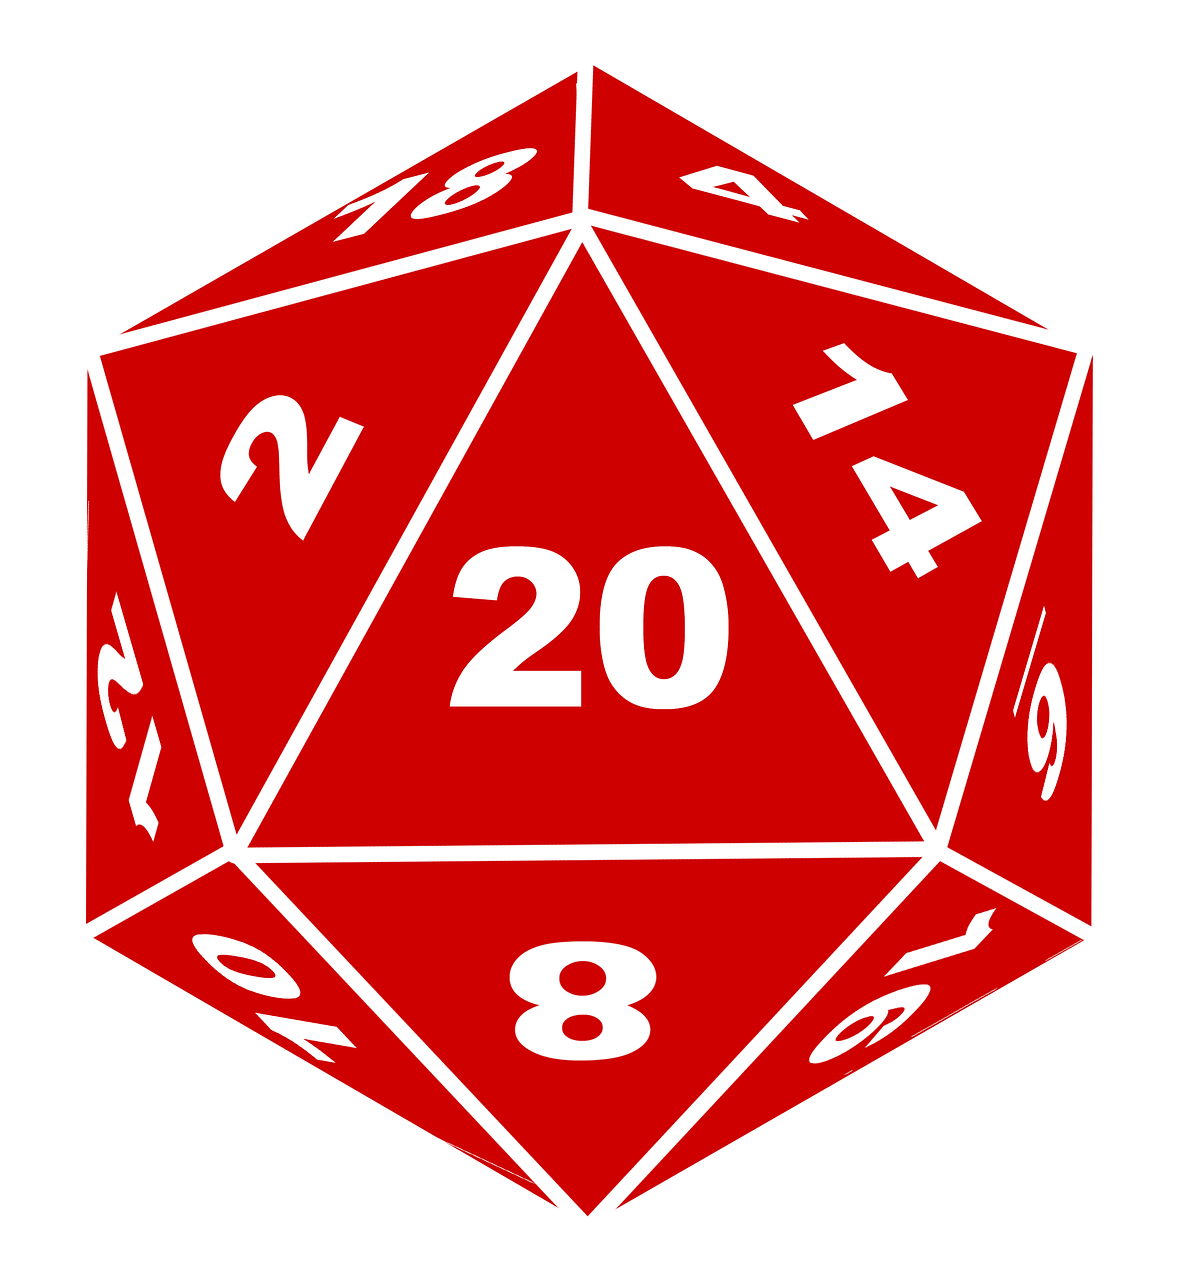 D20 Dice Dungeons Dragons - Free image on Pixabay